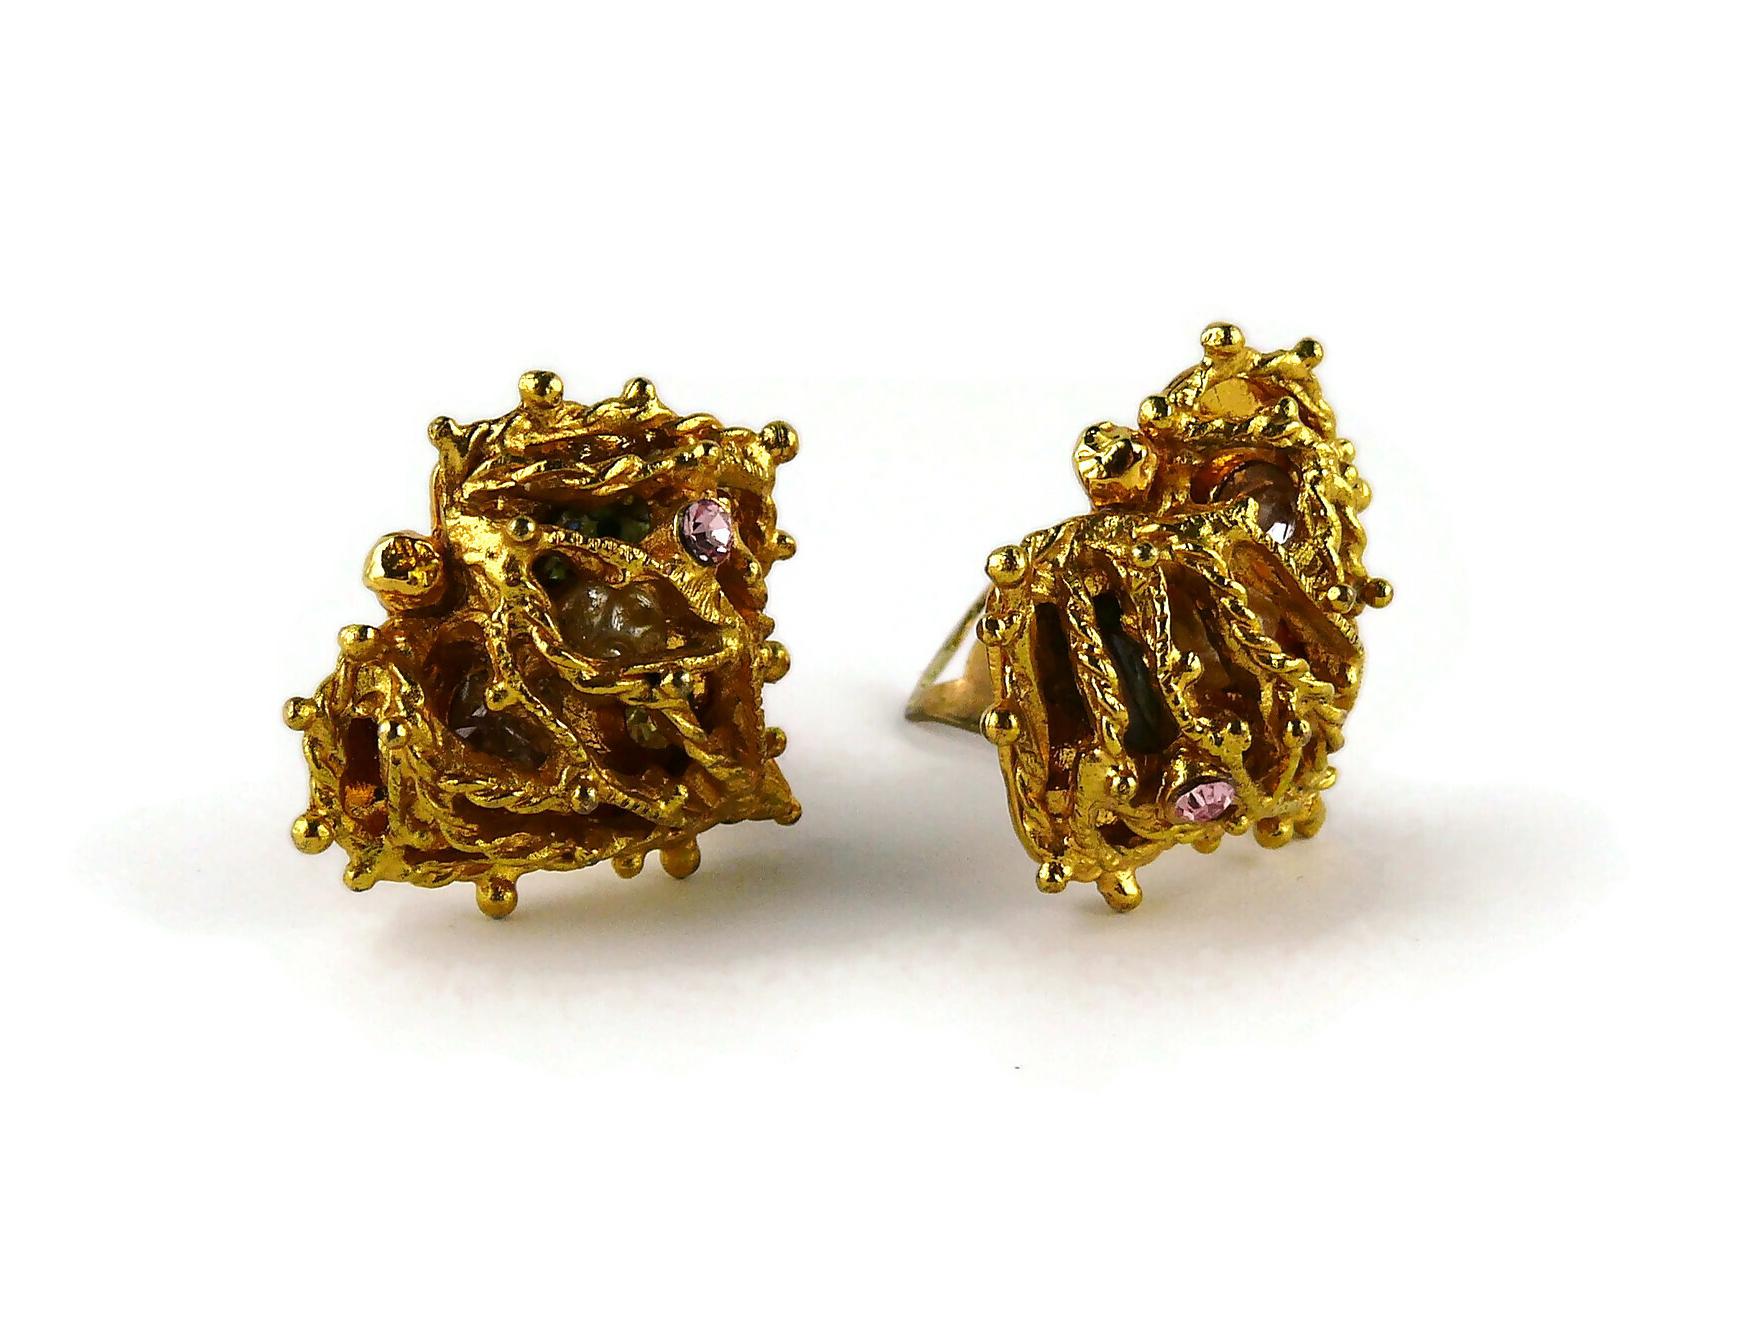 CHRISTIAN LACROIX vintage encaged gold toned clip-on earrings featuring crystal embellishement and faux pearl.

Marked CHRISTIAN LACROIX CL Made in France.

Indicative measurements : max. height approx. 2.7 cm (1.06 inches) / max. width approx. 2.3